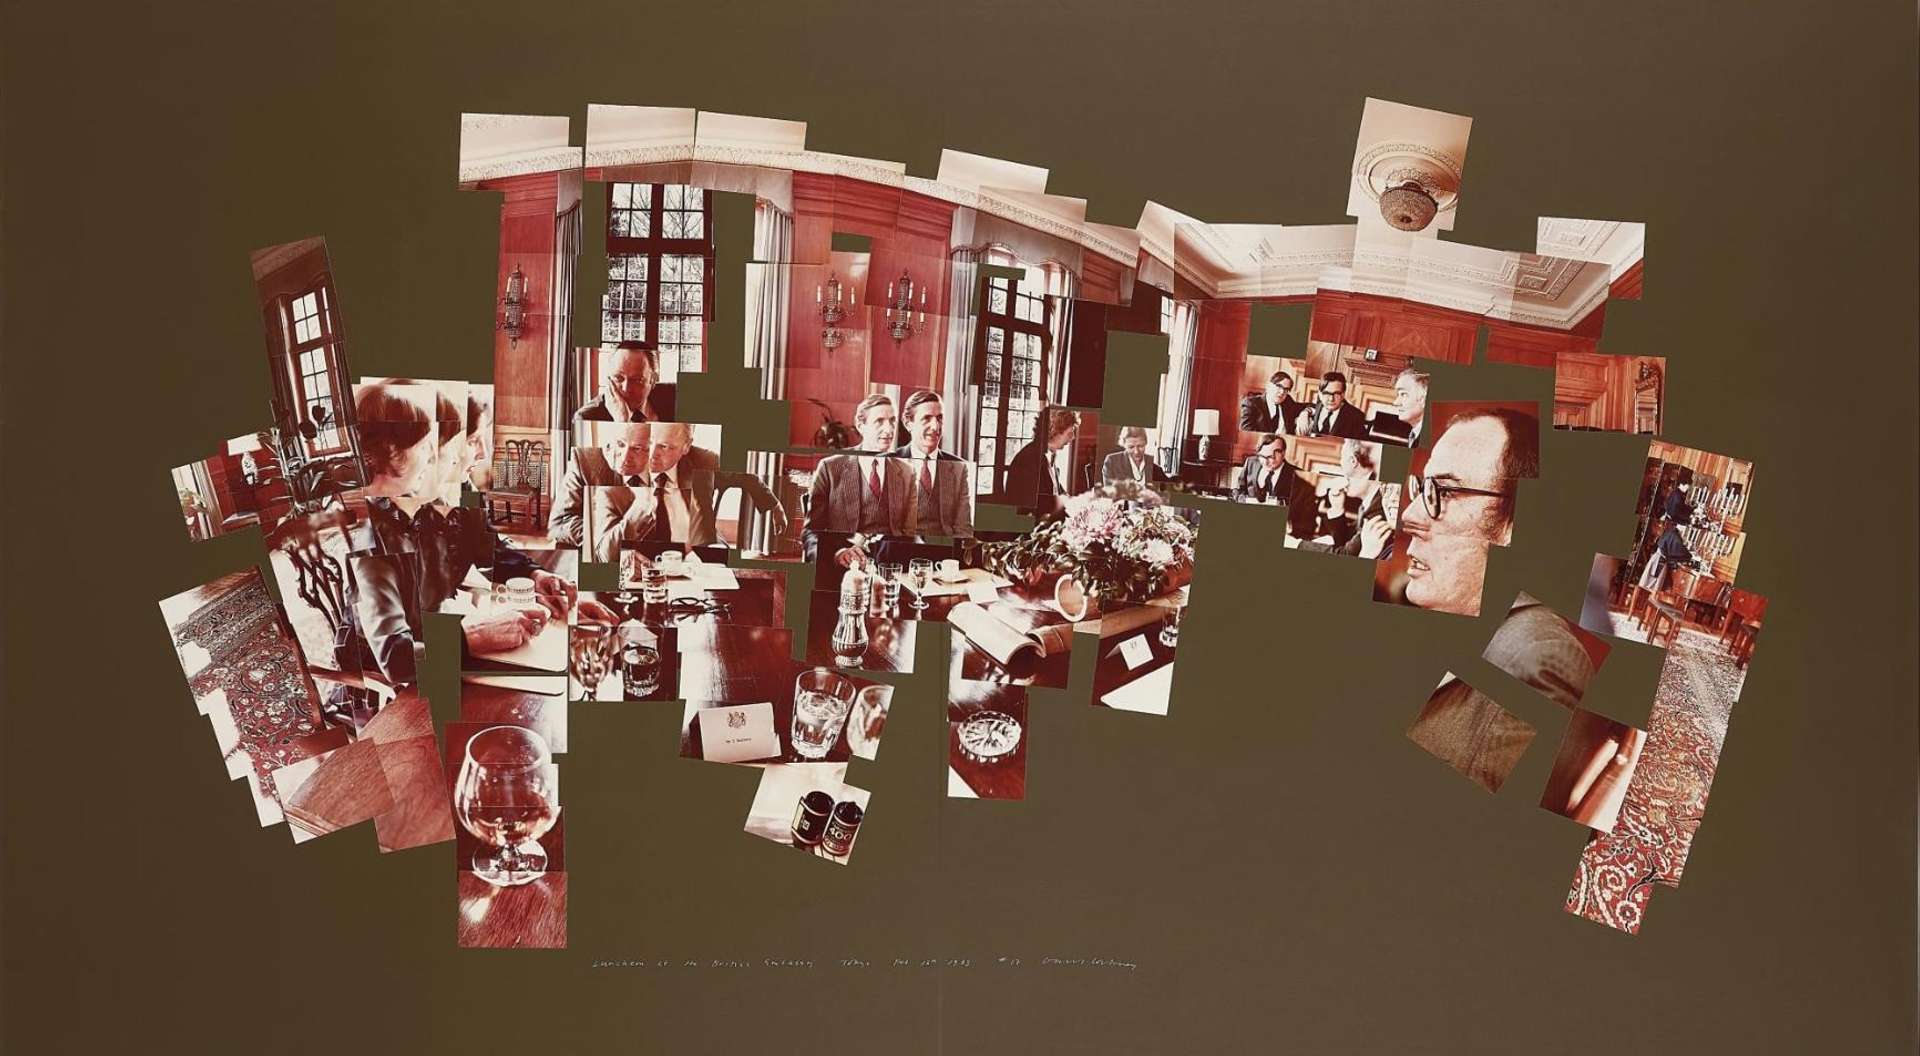 David Hockney's Luncheon At The British Embassy, Tokyo, February 16th 1983. A photo collage of the interior of The British Embassy with mean seated at a table.